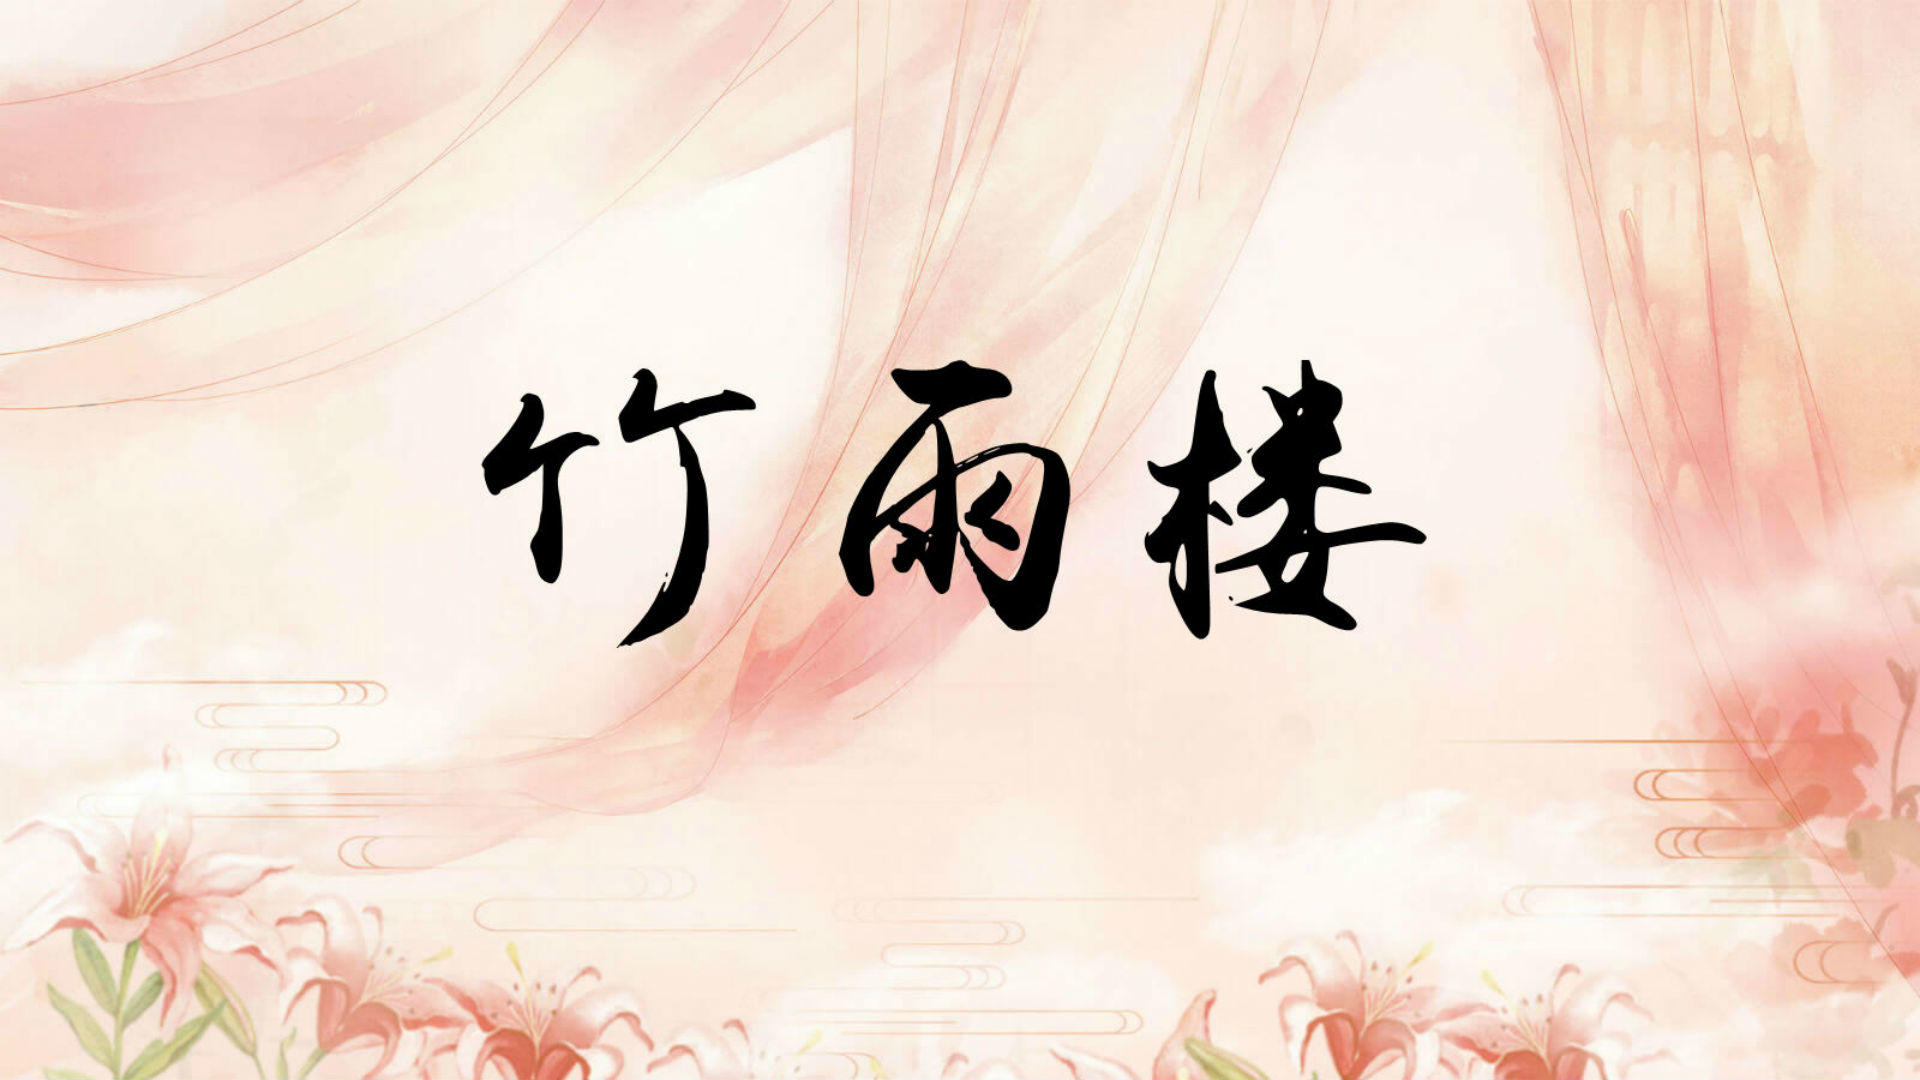 Banner of 竹雨樓 